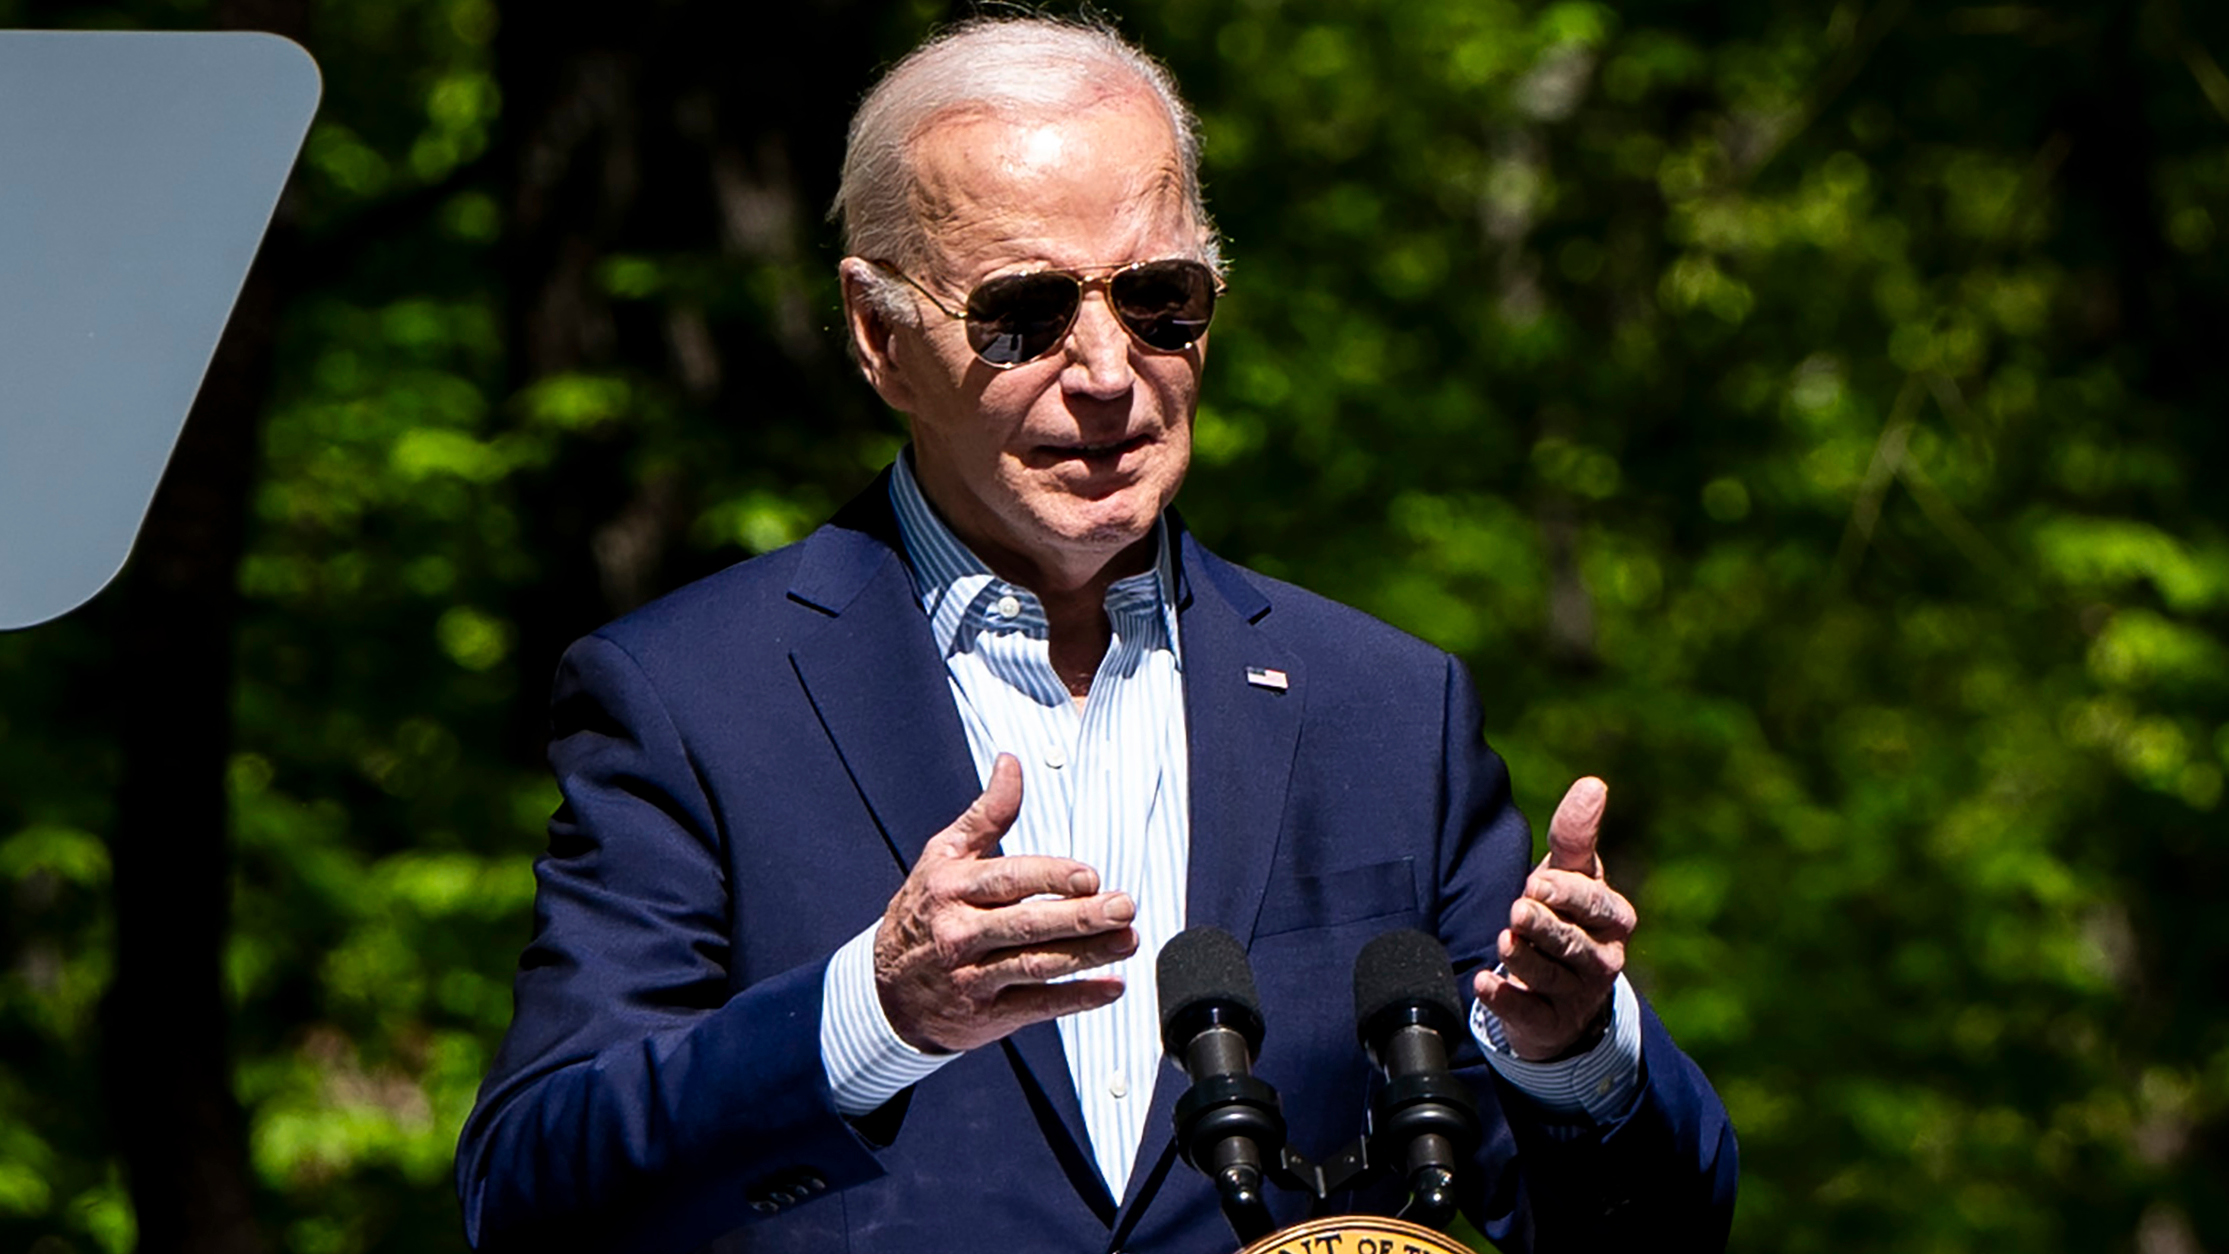 Criticism Towards Biden Over Anti-Semitic Protests Comments at Columbia